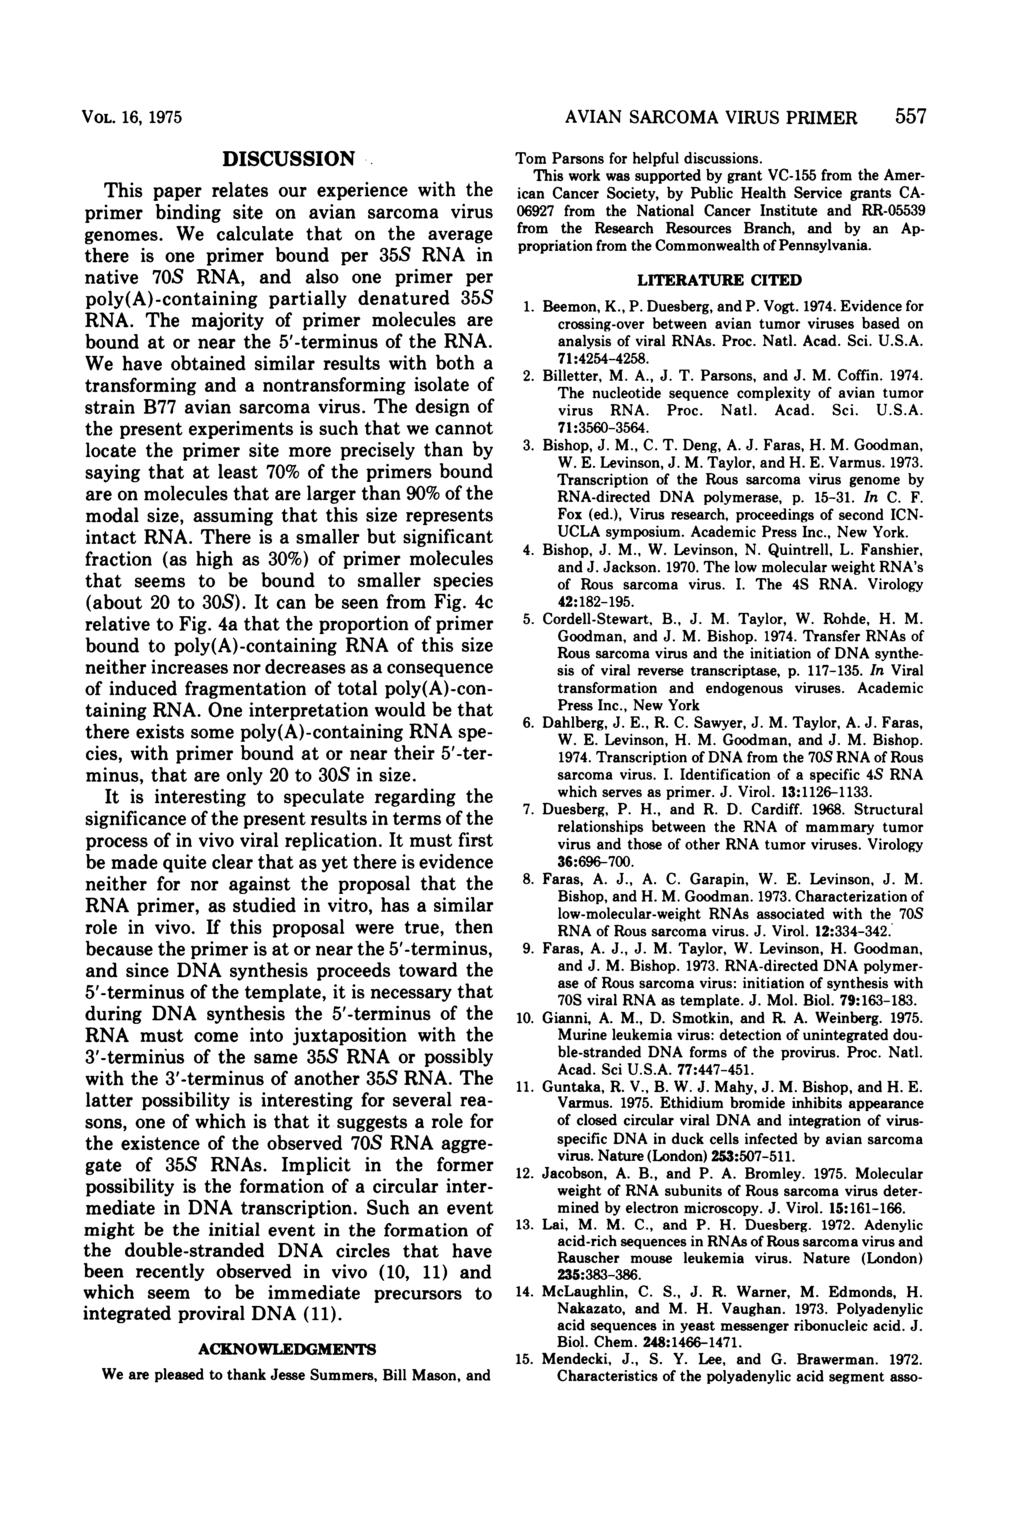 VOL. 16, 1975 DISCUSSION This paper relates our experience with the primer binding site on avian sarcoma virus genomes.